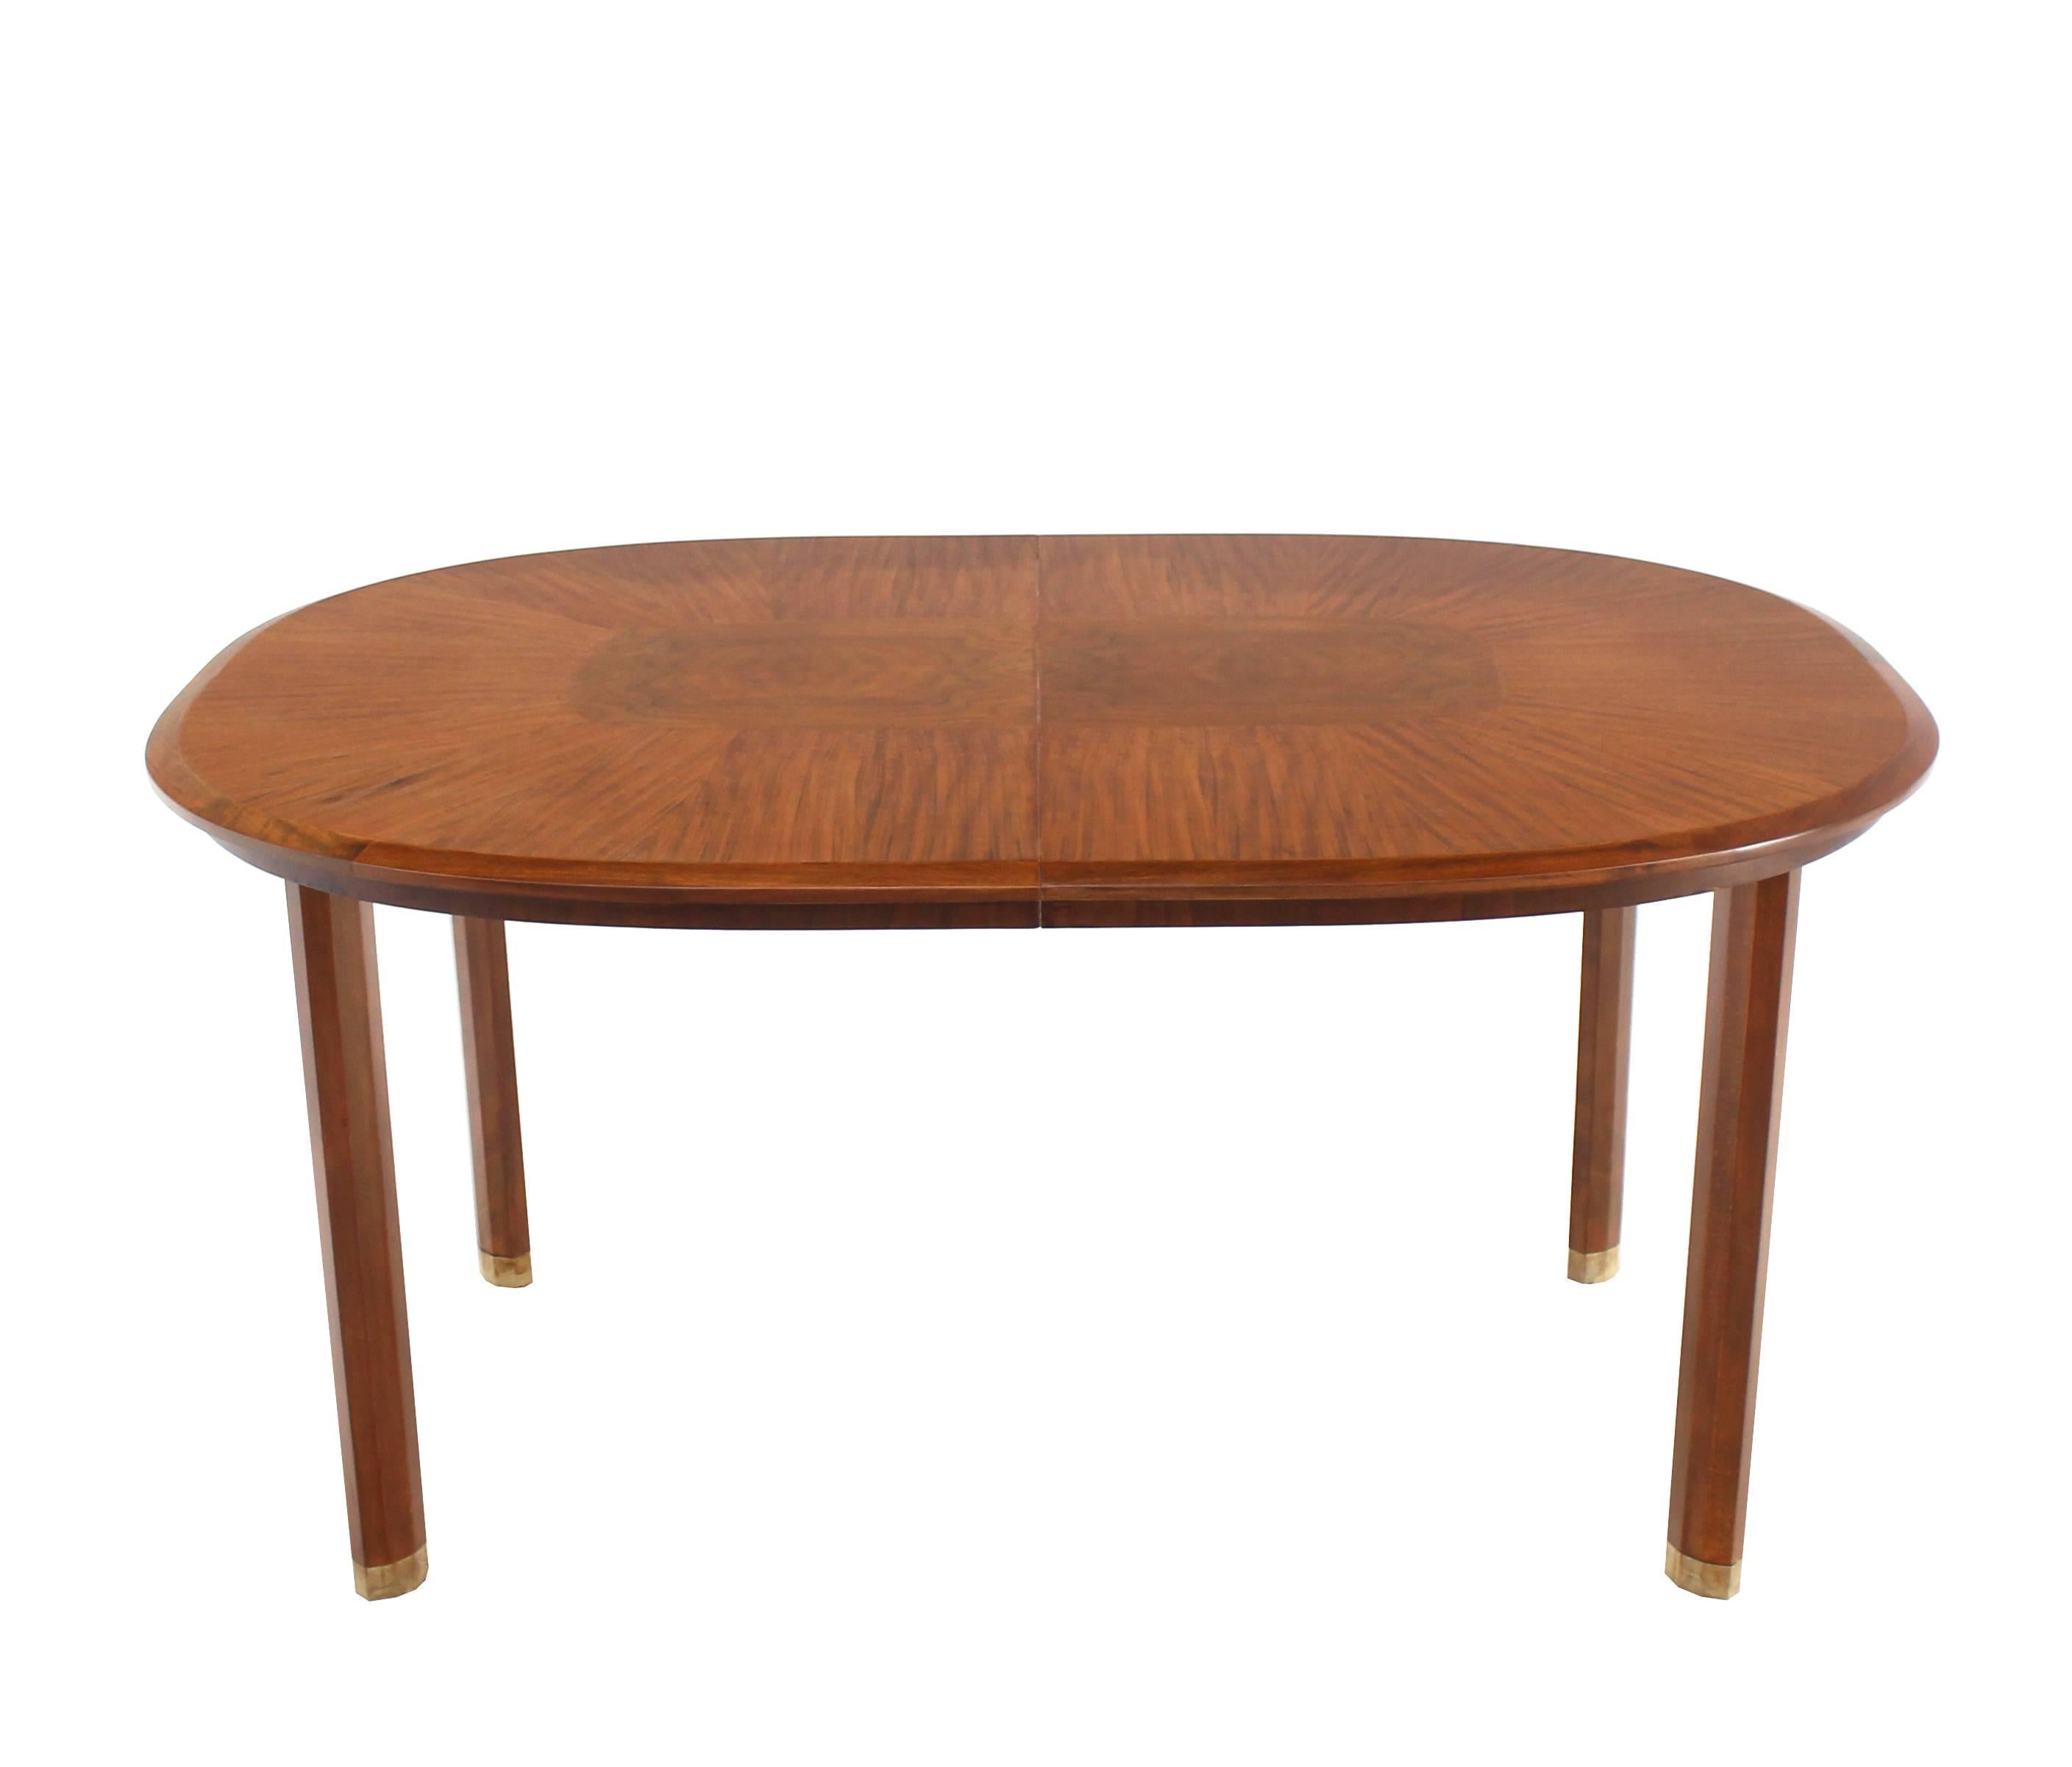 20th Century Edmond Spence Dining Table with Two Leaves For Sale